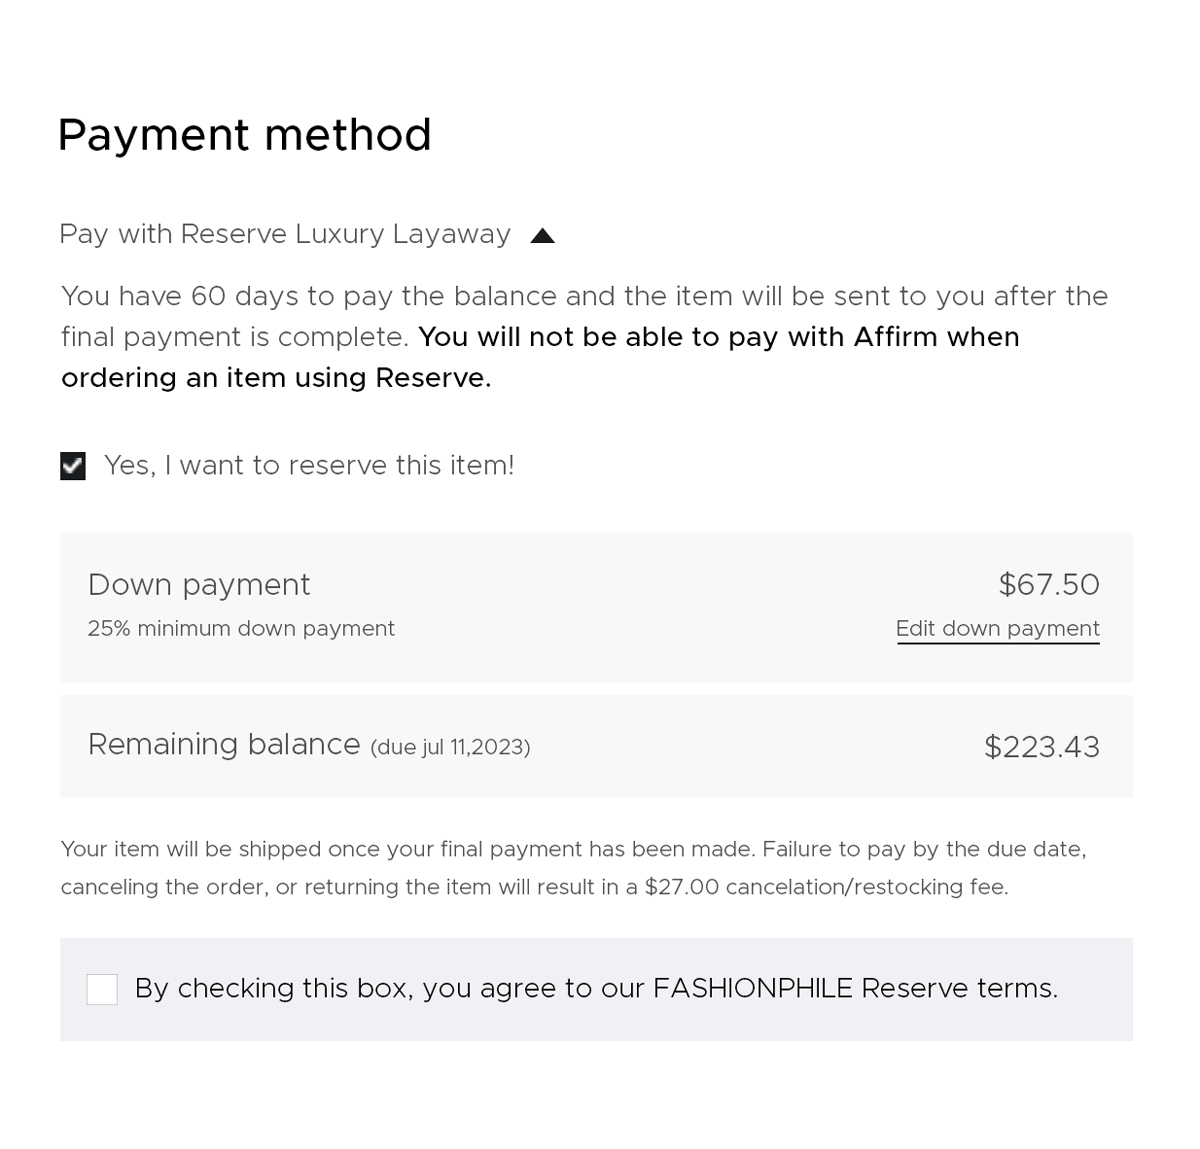 Example of using Fashionphile Reserve for your Order